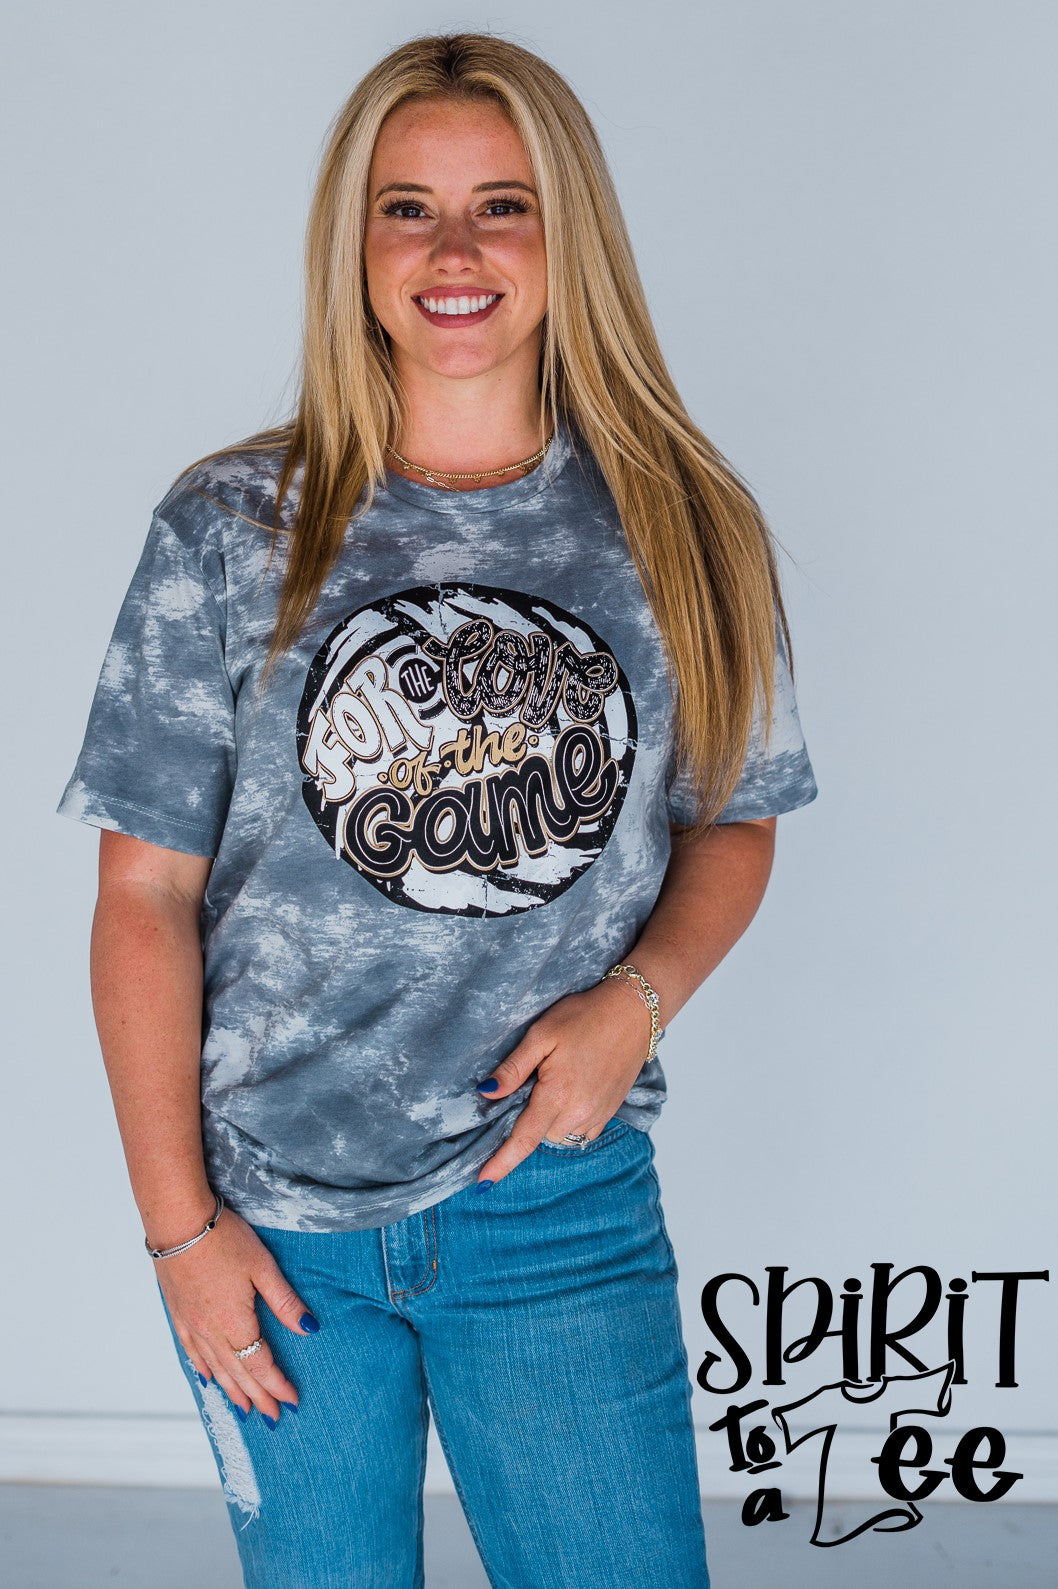 For the Love of the Game Volleyball Tie-Dye Tee